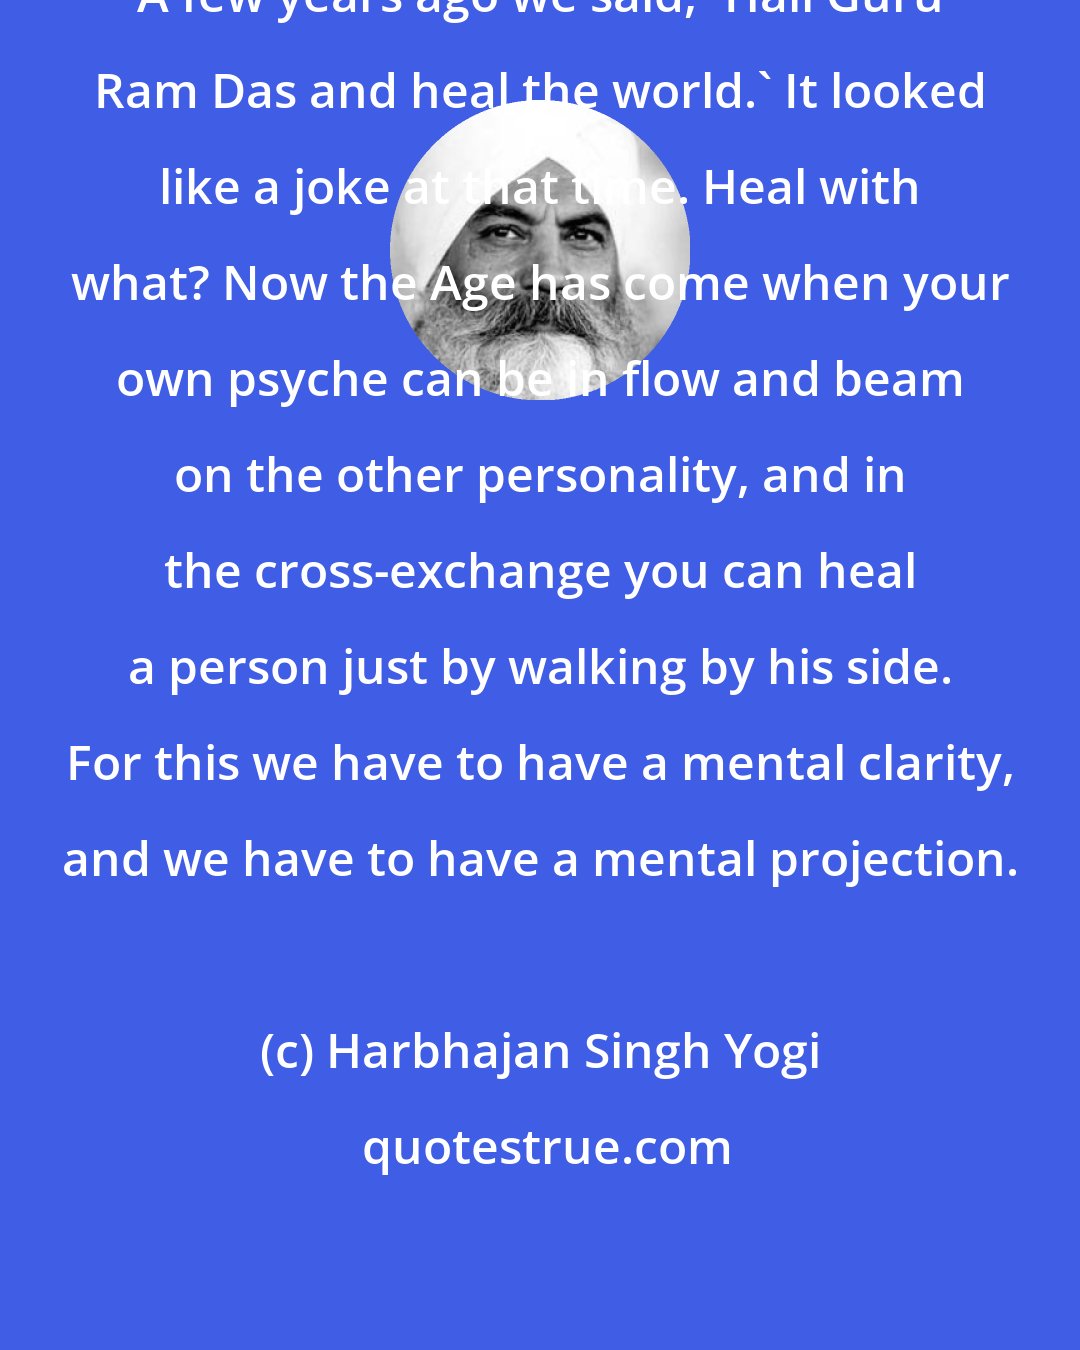 Harbhajan Singh Yogi: A few years ago we said, 'Hail Guru Ram Das and heal the world.' It looked like a joke at that time. Heal with what? Now the Age has come when your own psyche can be in flow and beam on the other personality, and in the cross-exchange you can heal a person just by walking by his side. For this we have to have a mental clarity, and we have to have a mental projection.